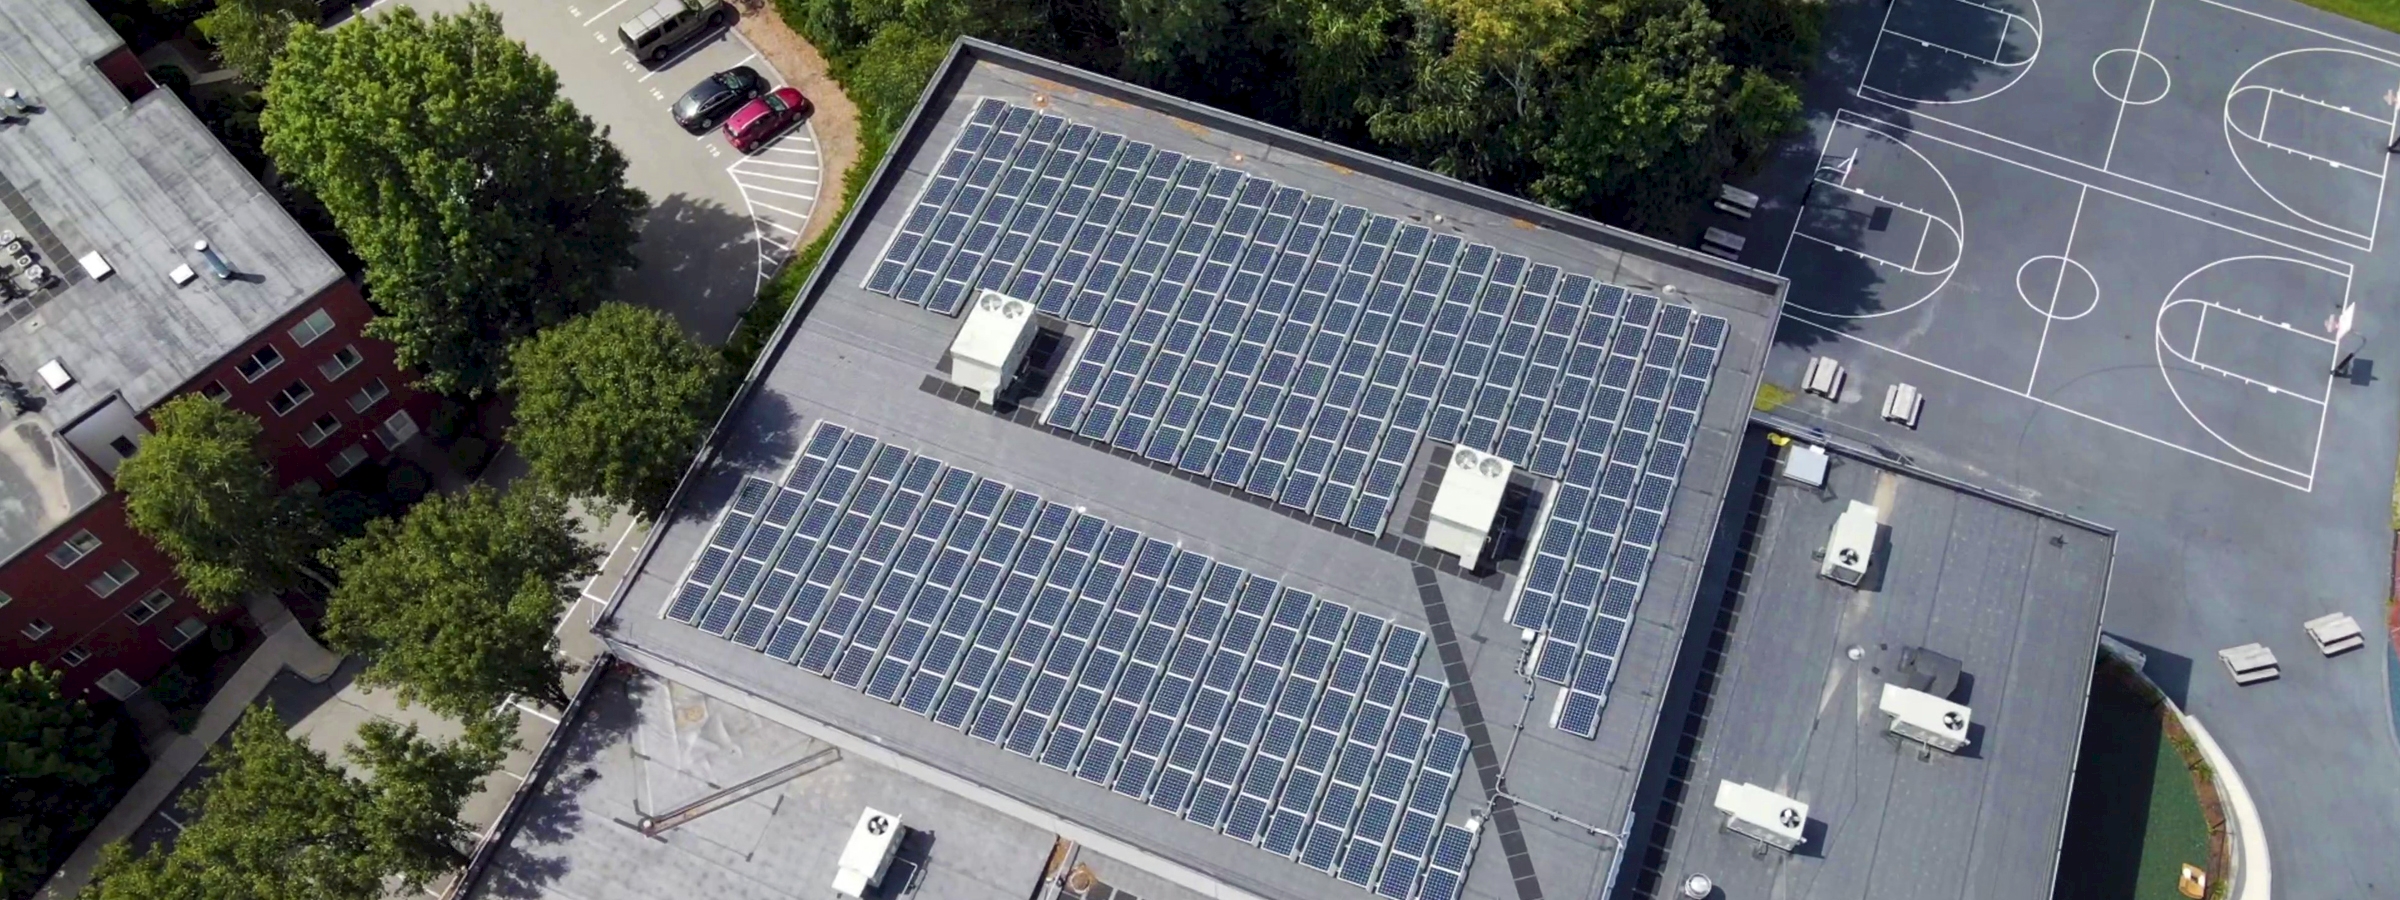 Generate Income on Your Commercial Solar Install - Here's How!